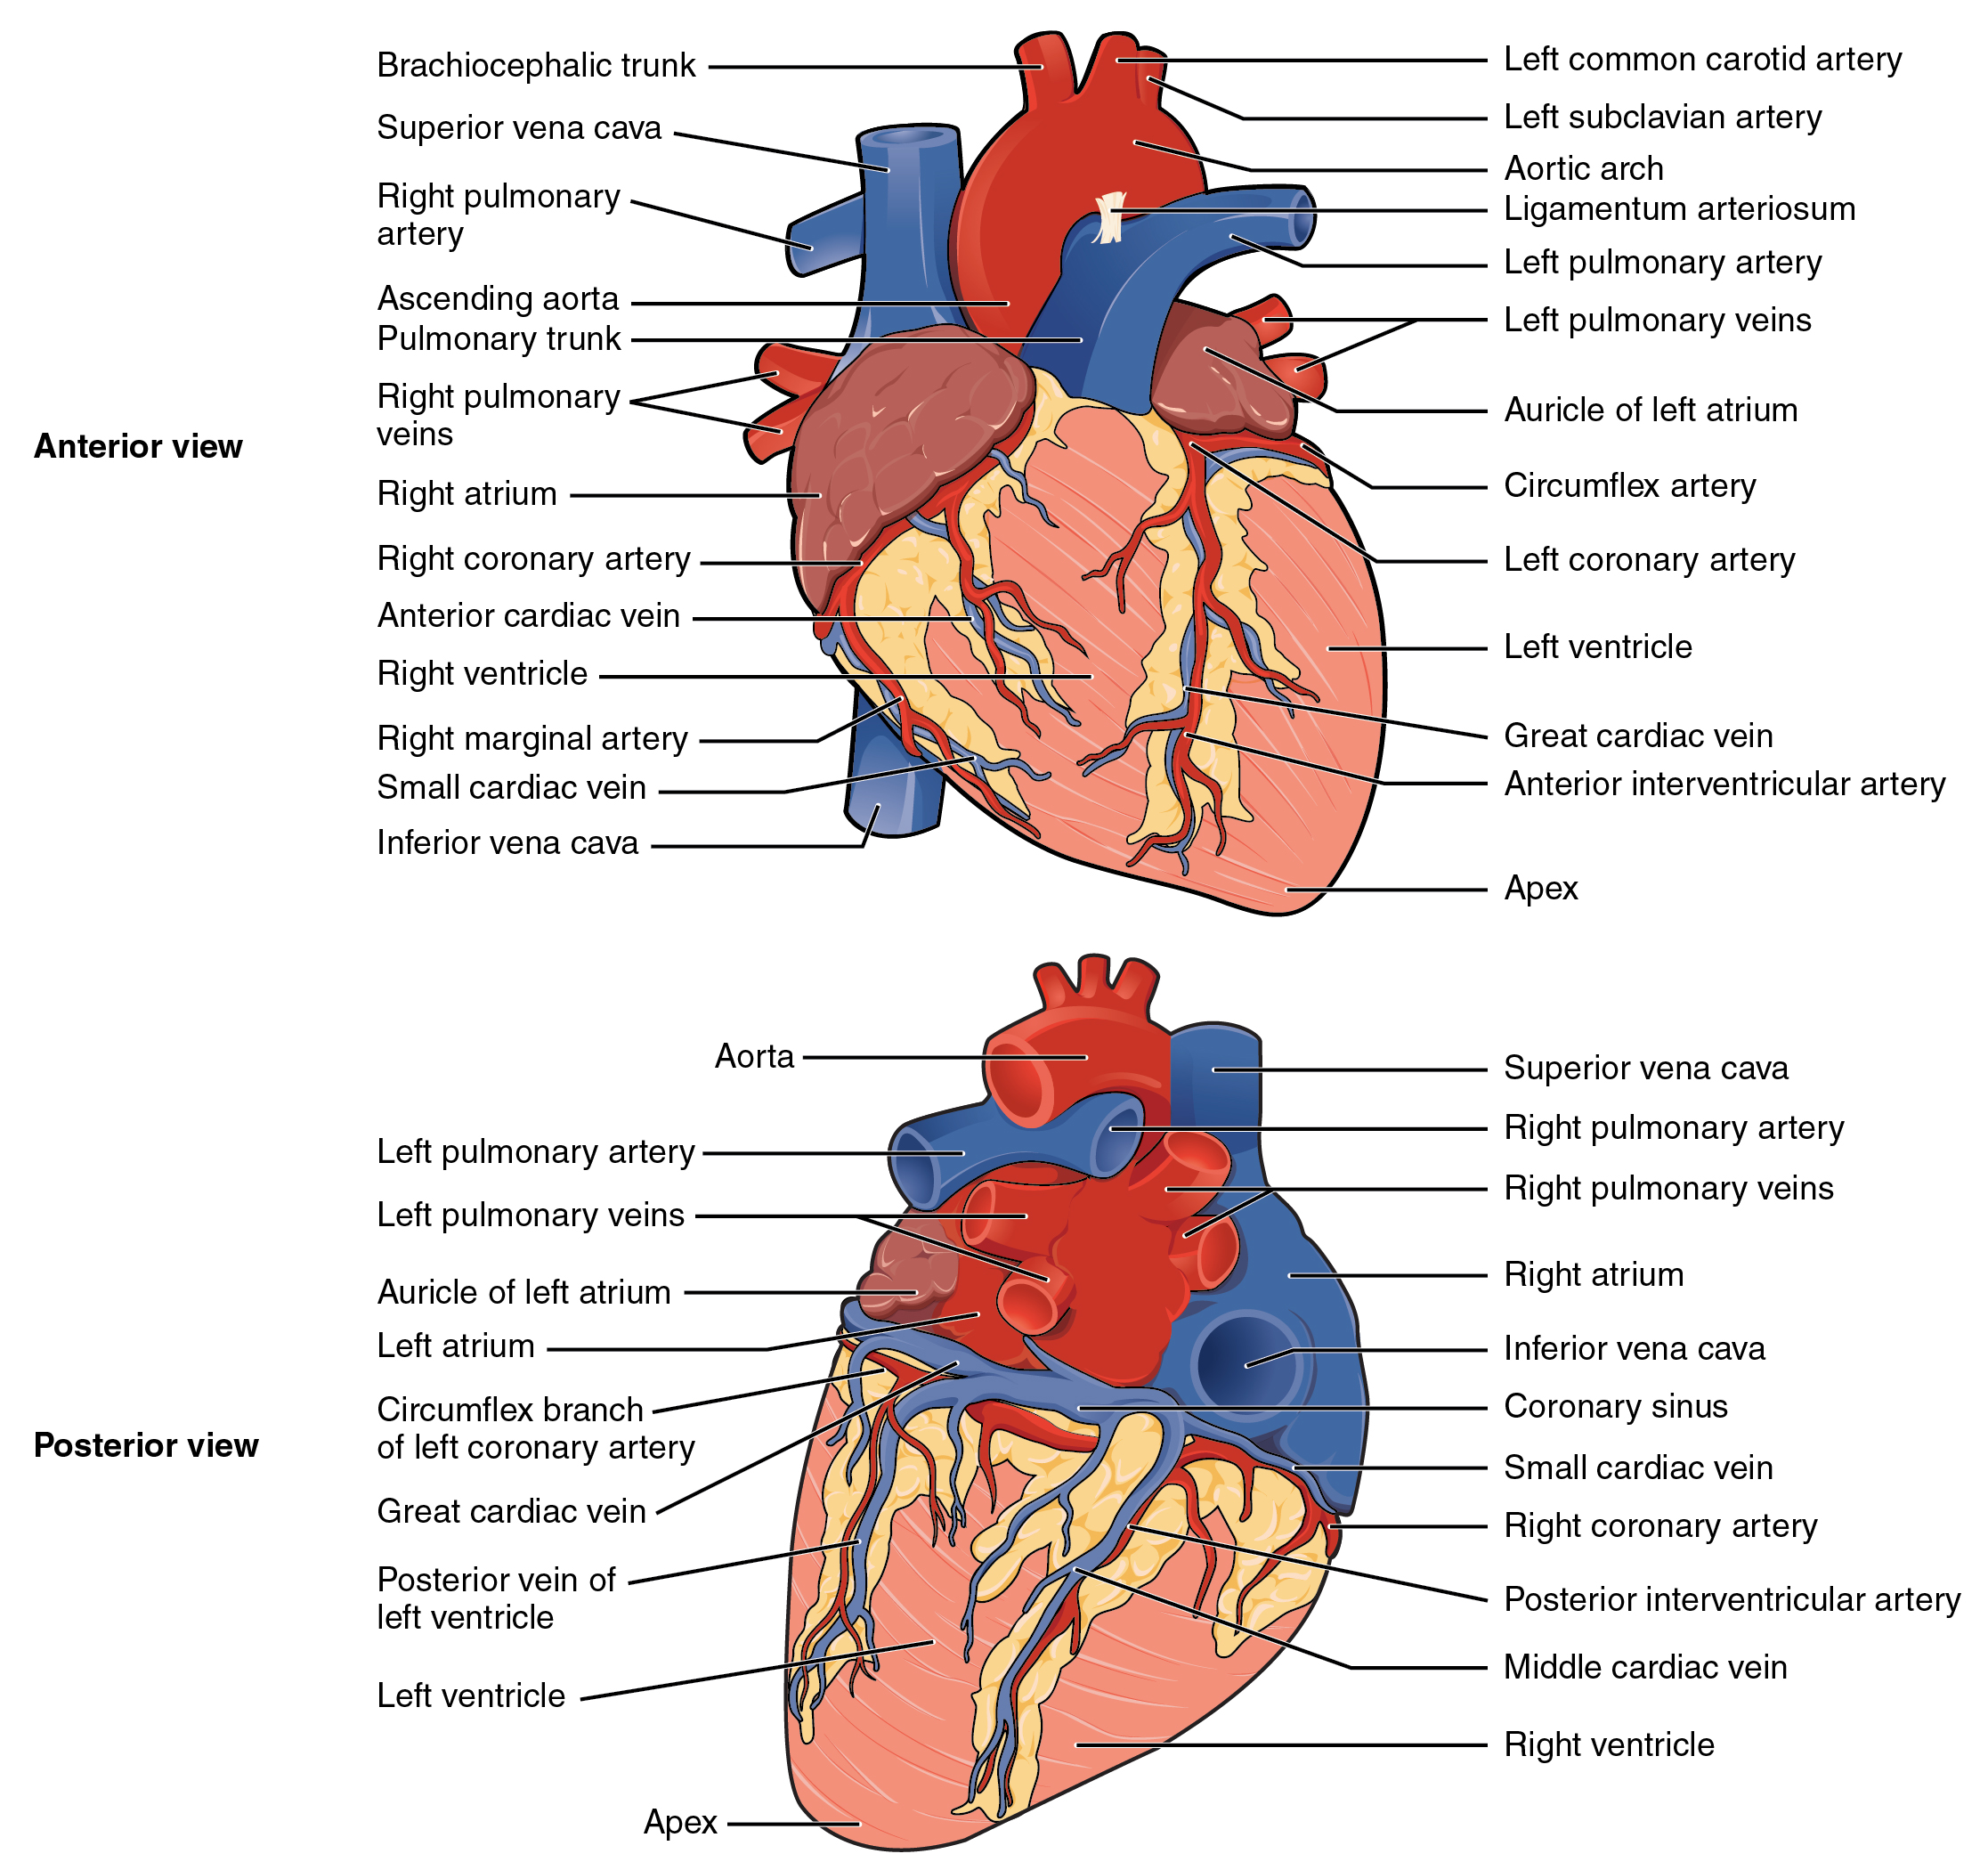 Illustration with labels, showing heart from anterior and posterior views.